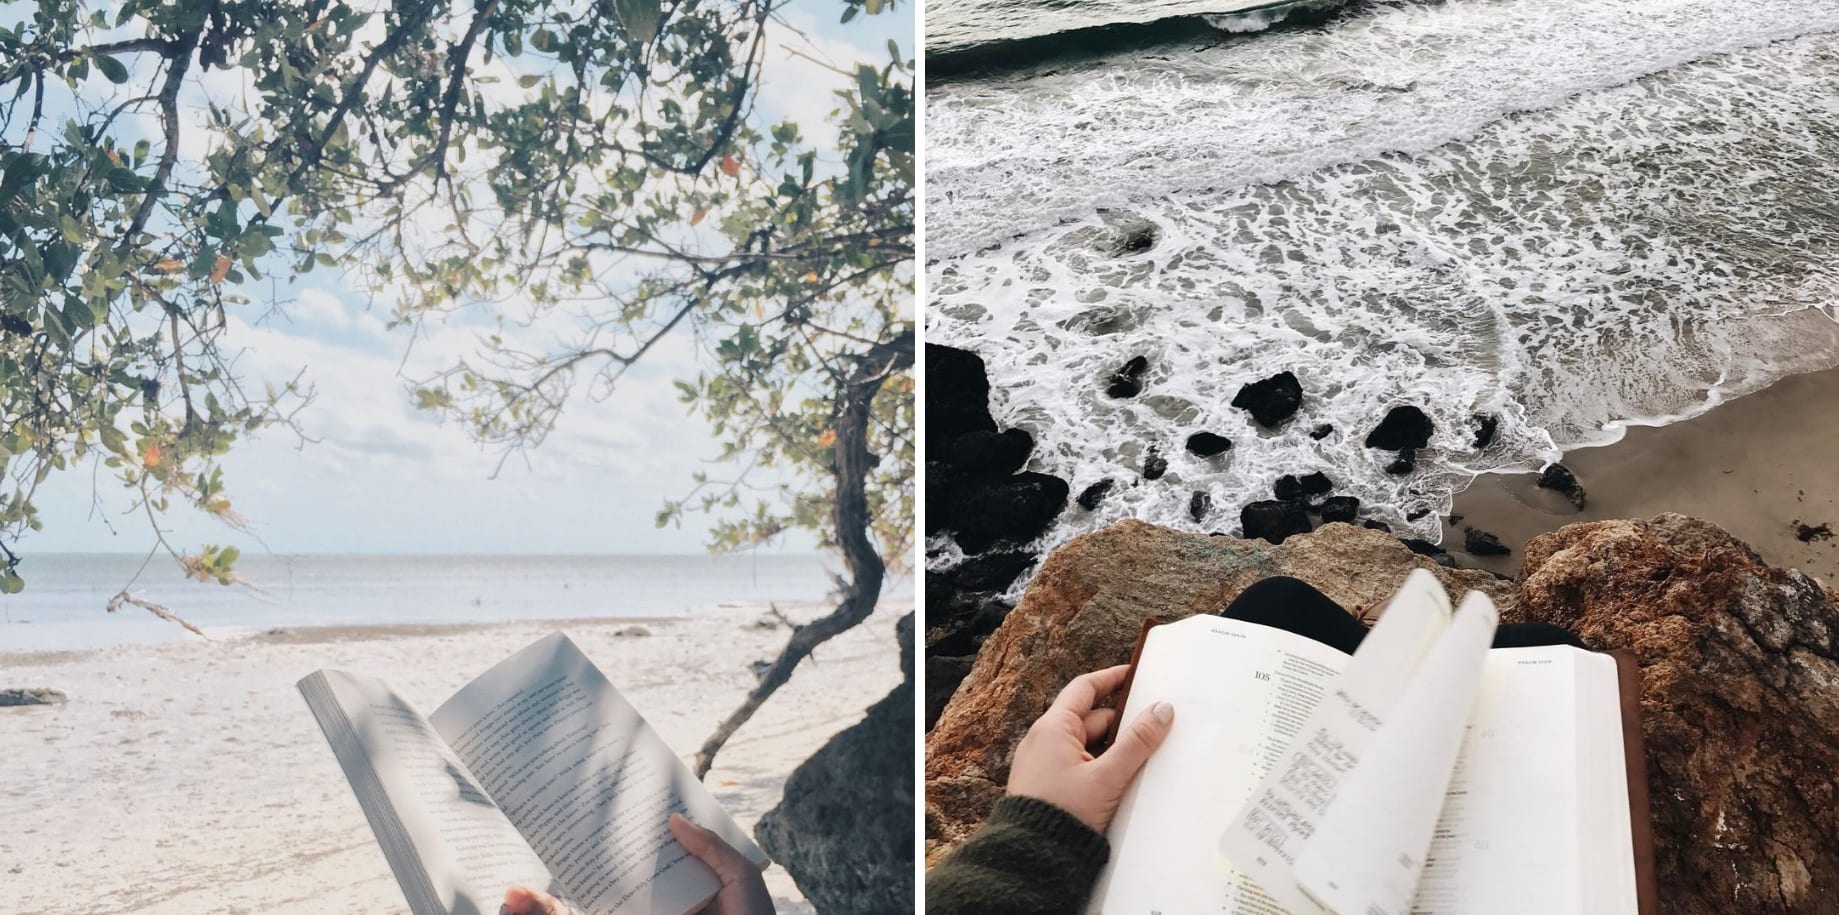 Books being read at the beach